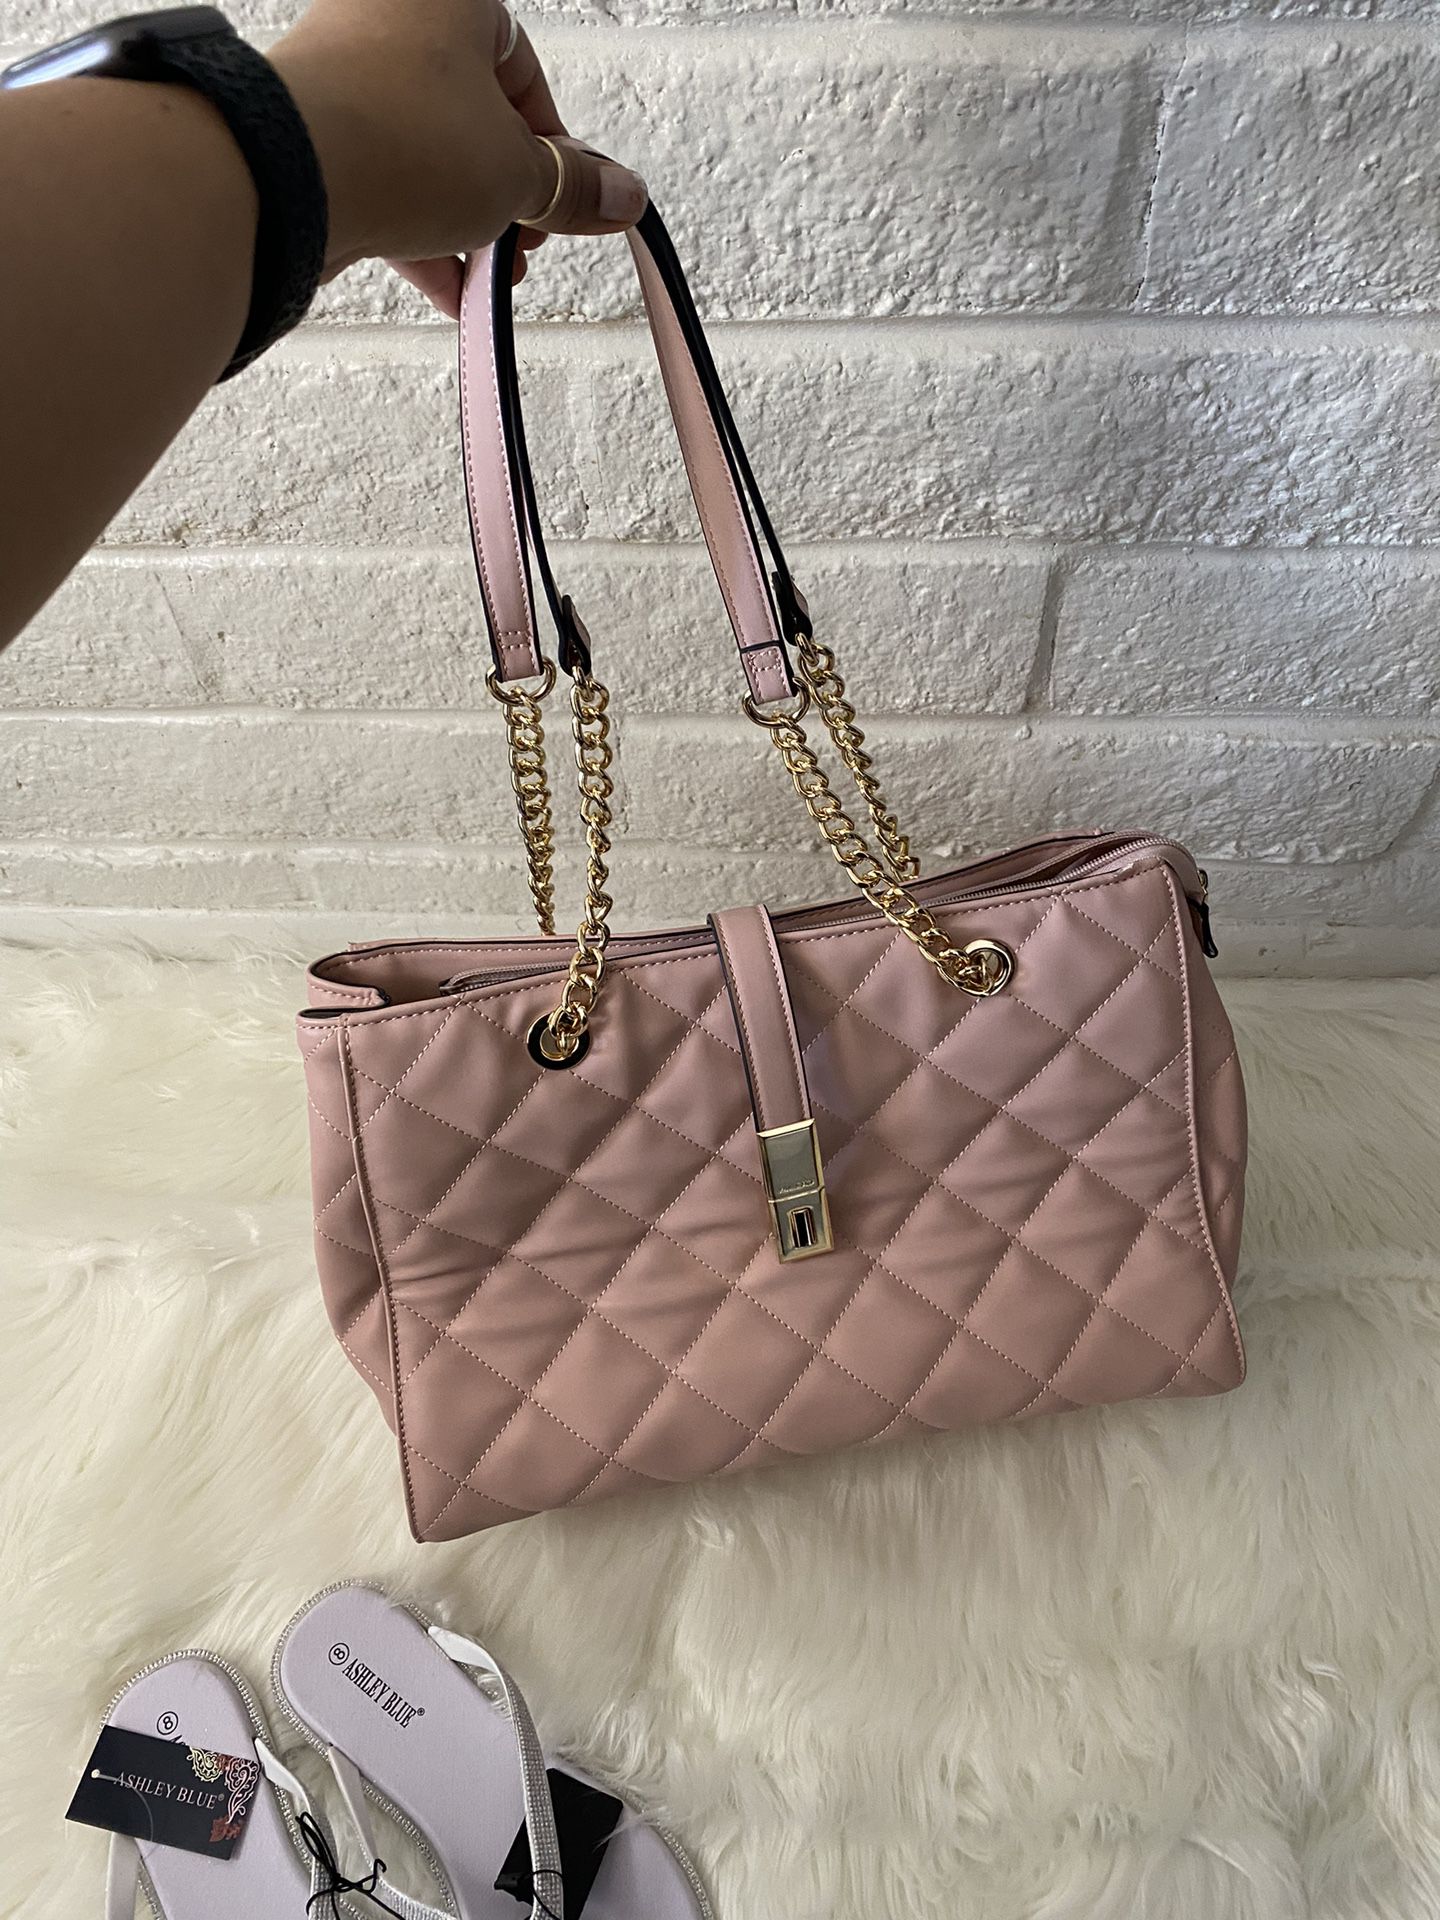 ALDO BAGS %Original for Sale in New York, NY - OfferUp